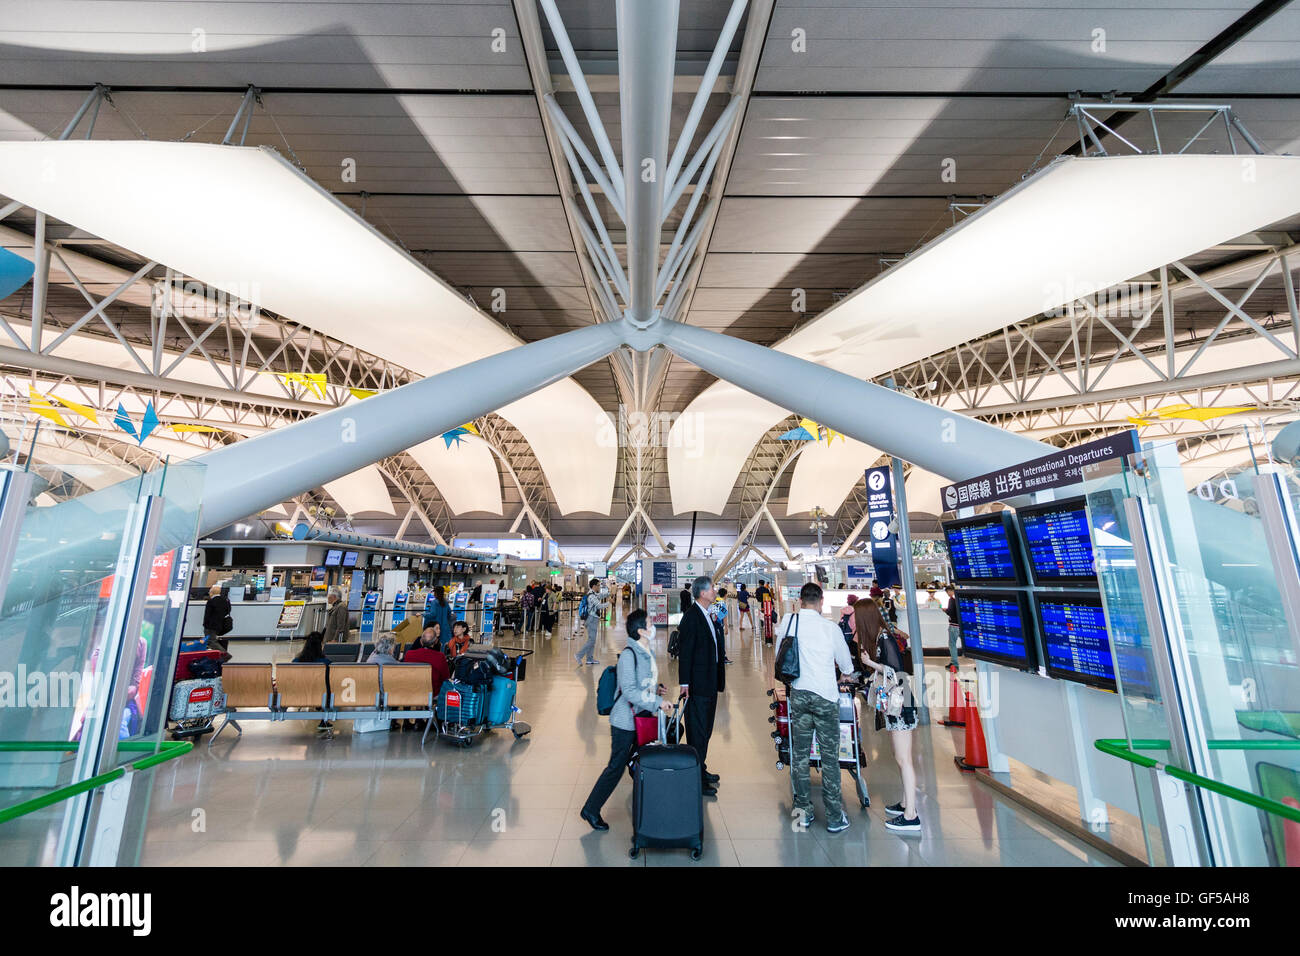 Interior of Kansai Airport, Osaka, Japan, in the International Departures  lounge. View into the Cartier store with Cartier logo over the entrance  Stock Photo - Alamy